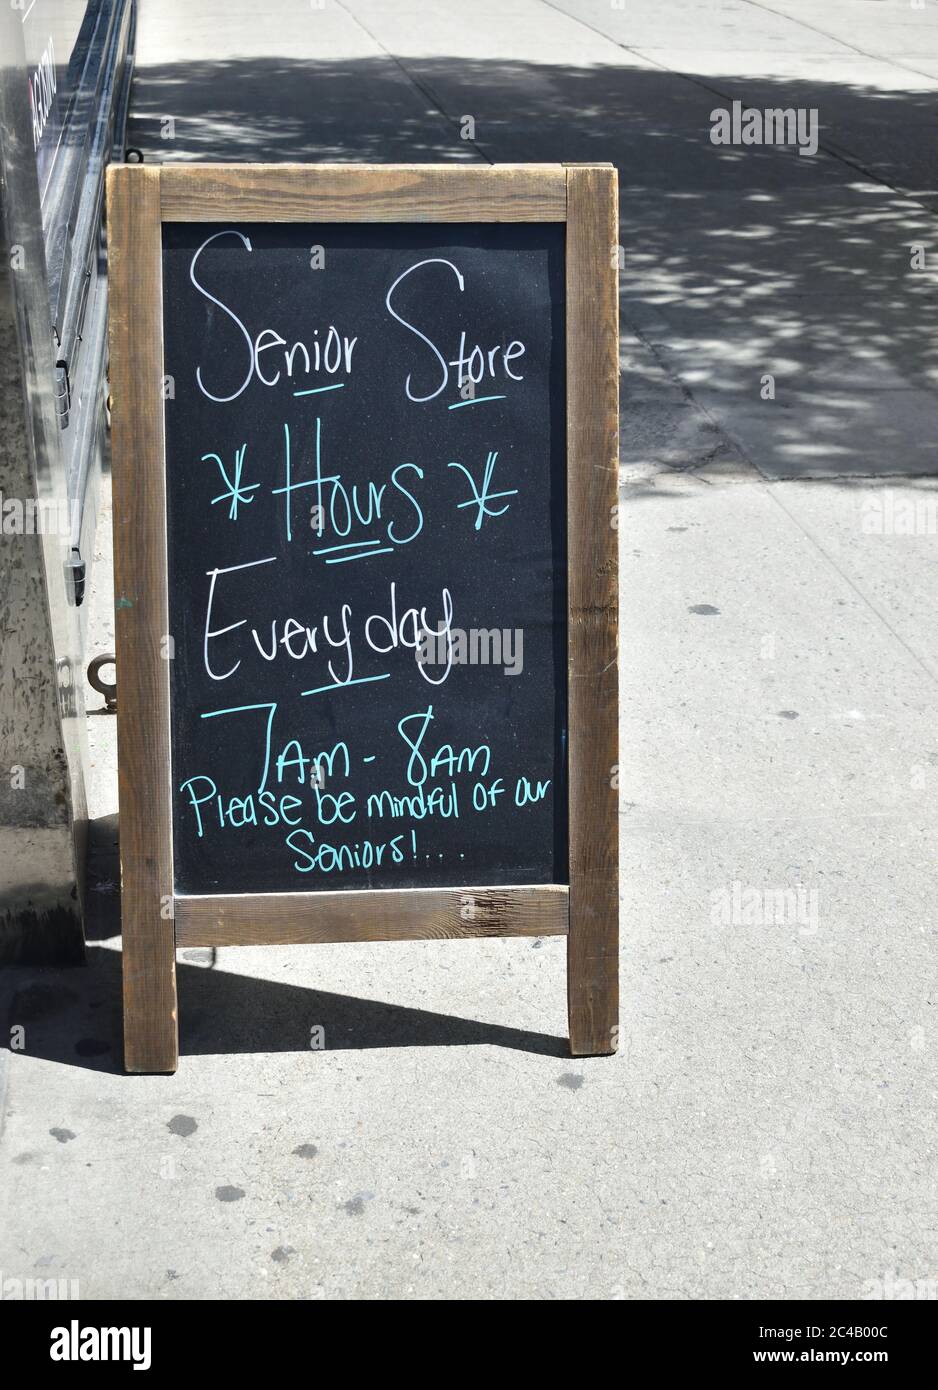 A-frame sign reading 'Senior store hours everyday - 7am to 8am. Please be mindful of our seniors!' on a city sidewalk, May 22, 2020, in New York. Stock Photo